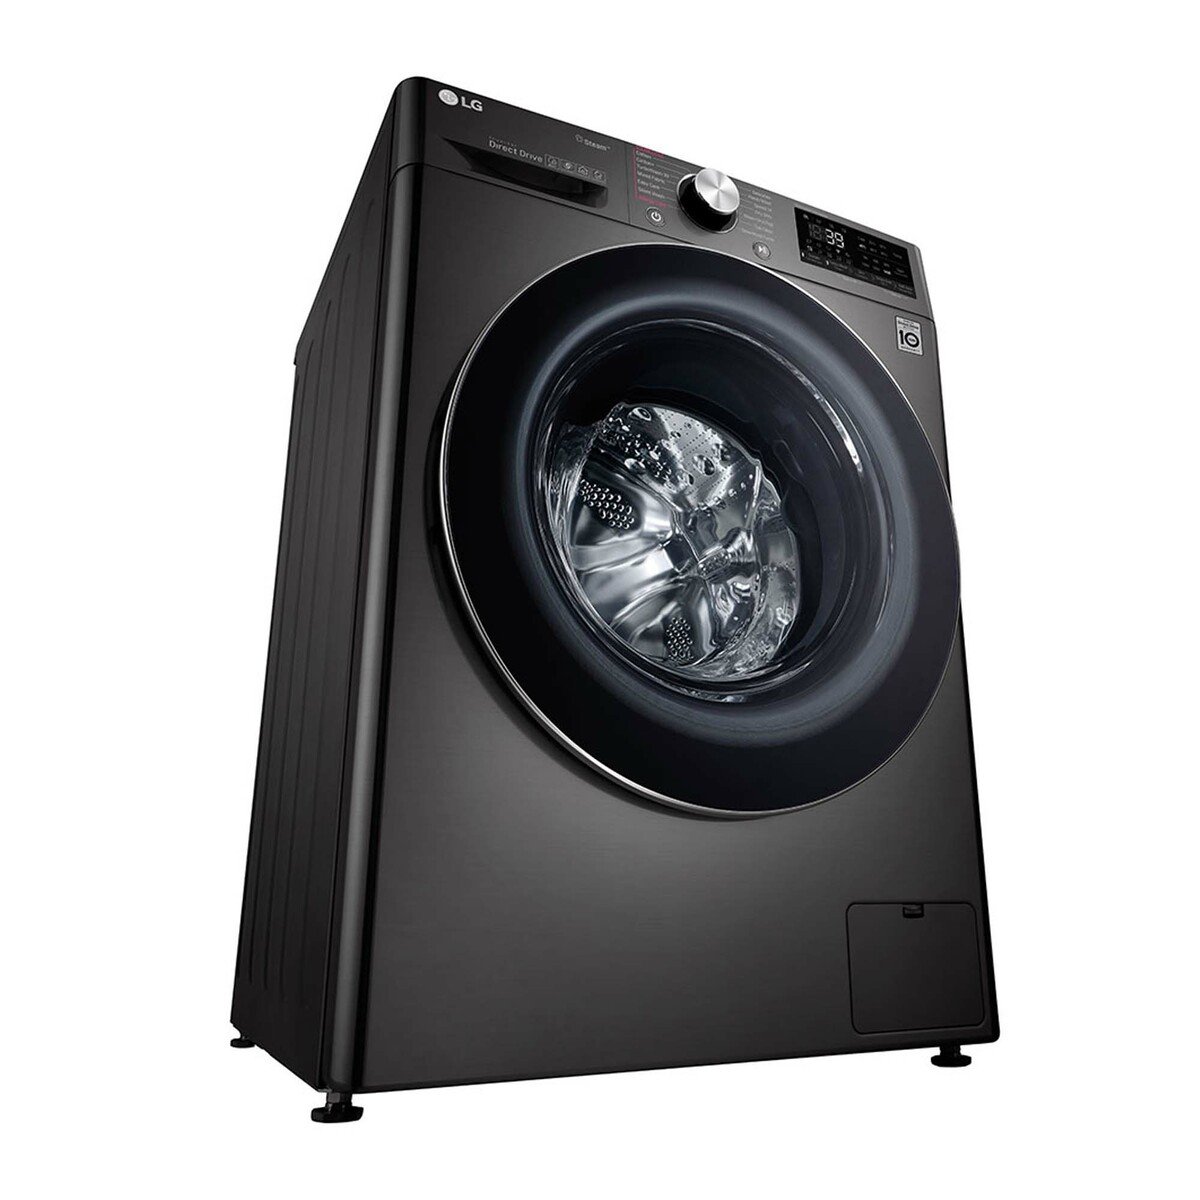 LG Front Load Washer & Dryer F4V9RCP2E 10/7KG, Bigger Capacity, AI DD, Steam, ThinQ